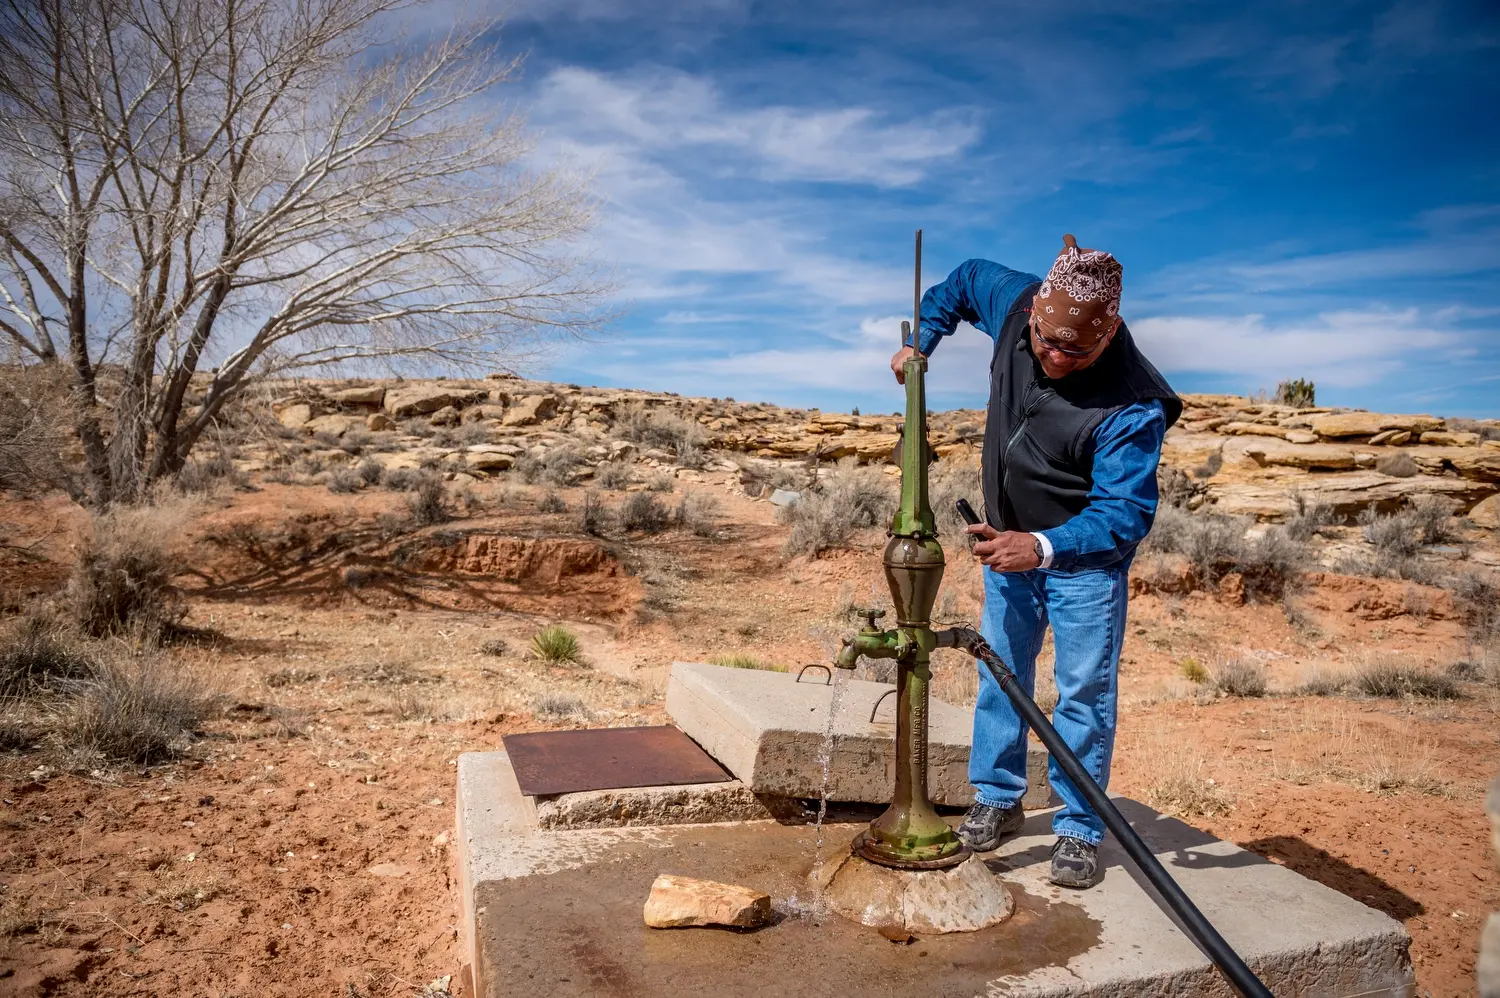 Dariel Yazzie pumps water outside. Image by Mary F. Calvert. United States, 2020.